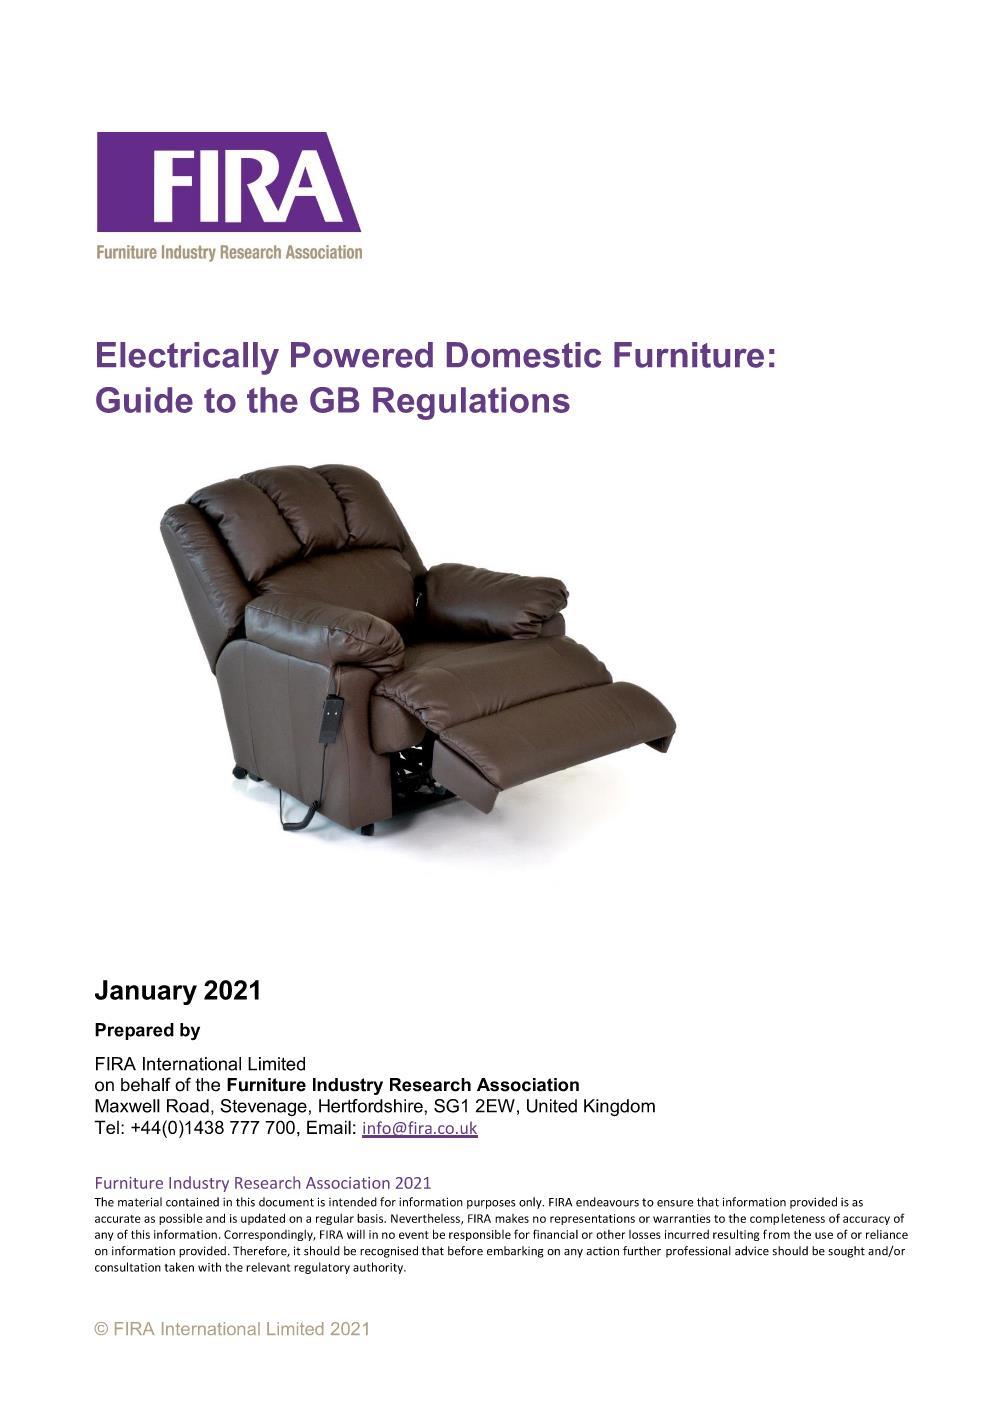 Electrically Powered Domestic Furniture: Guide to the GB Regulations